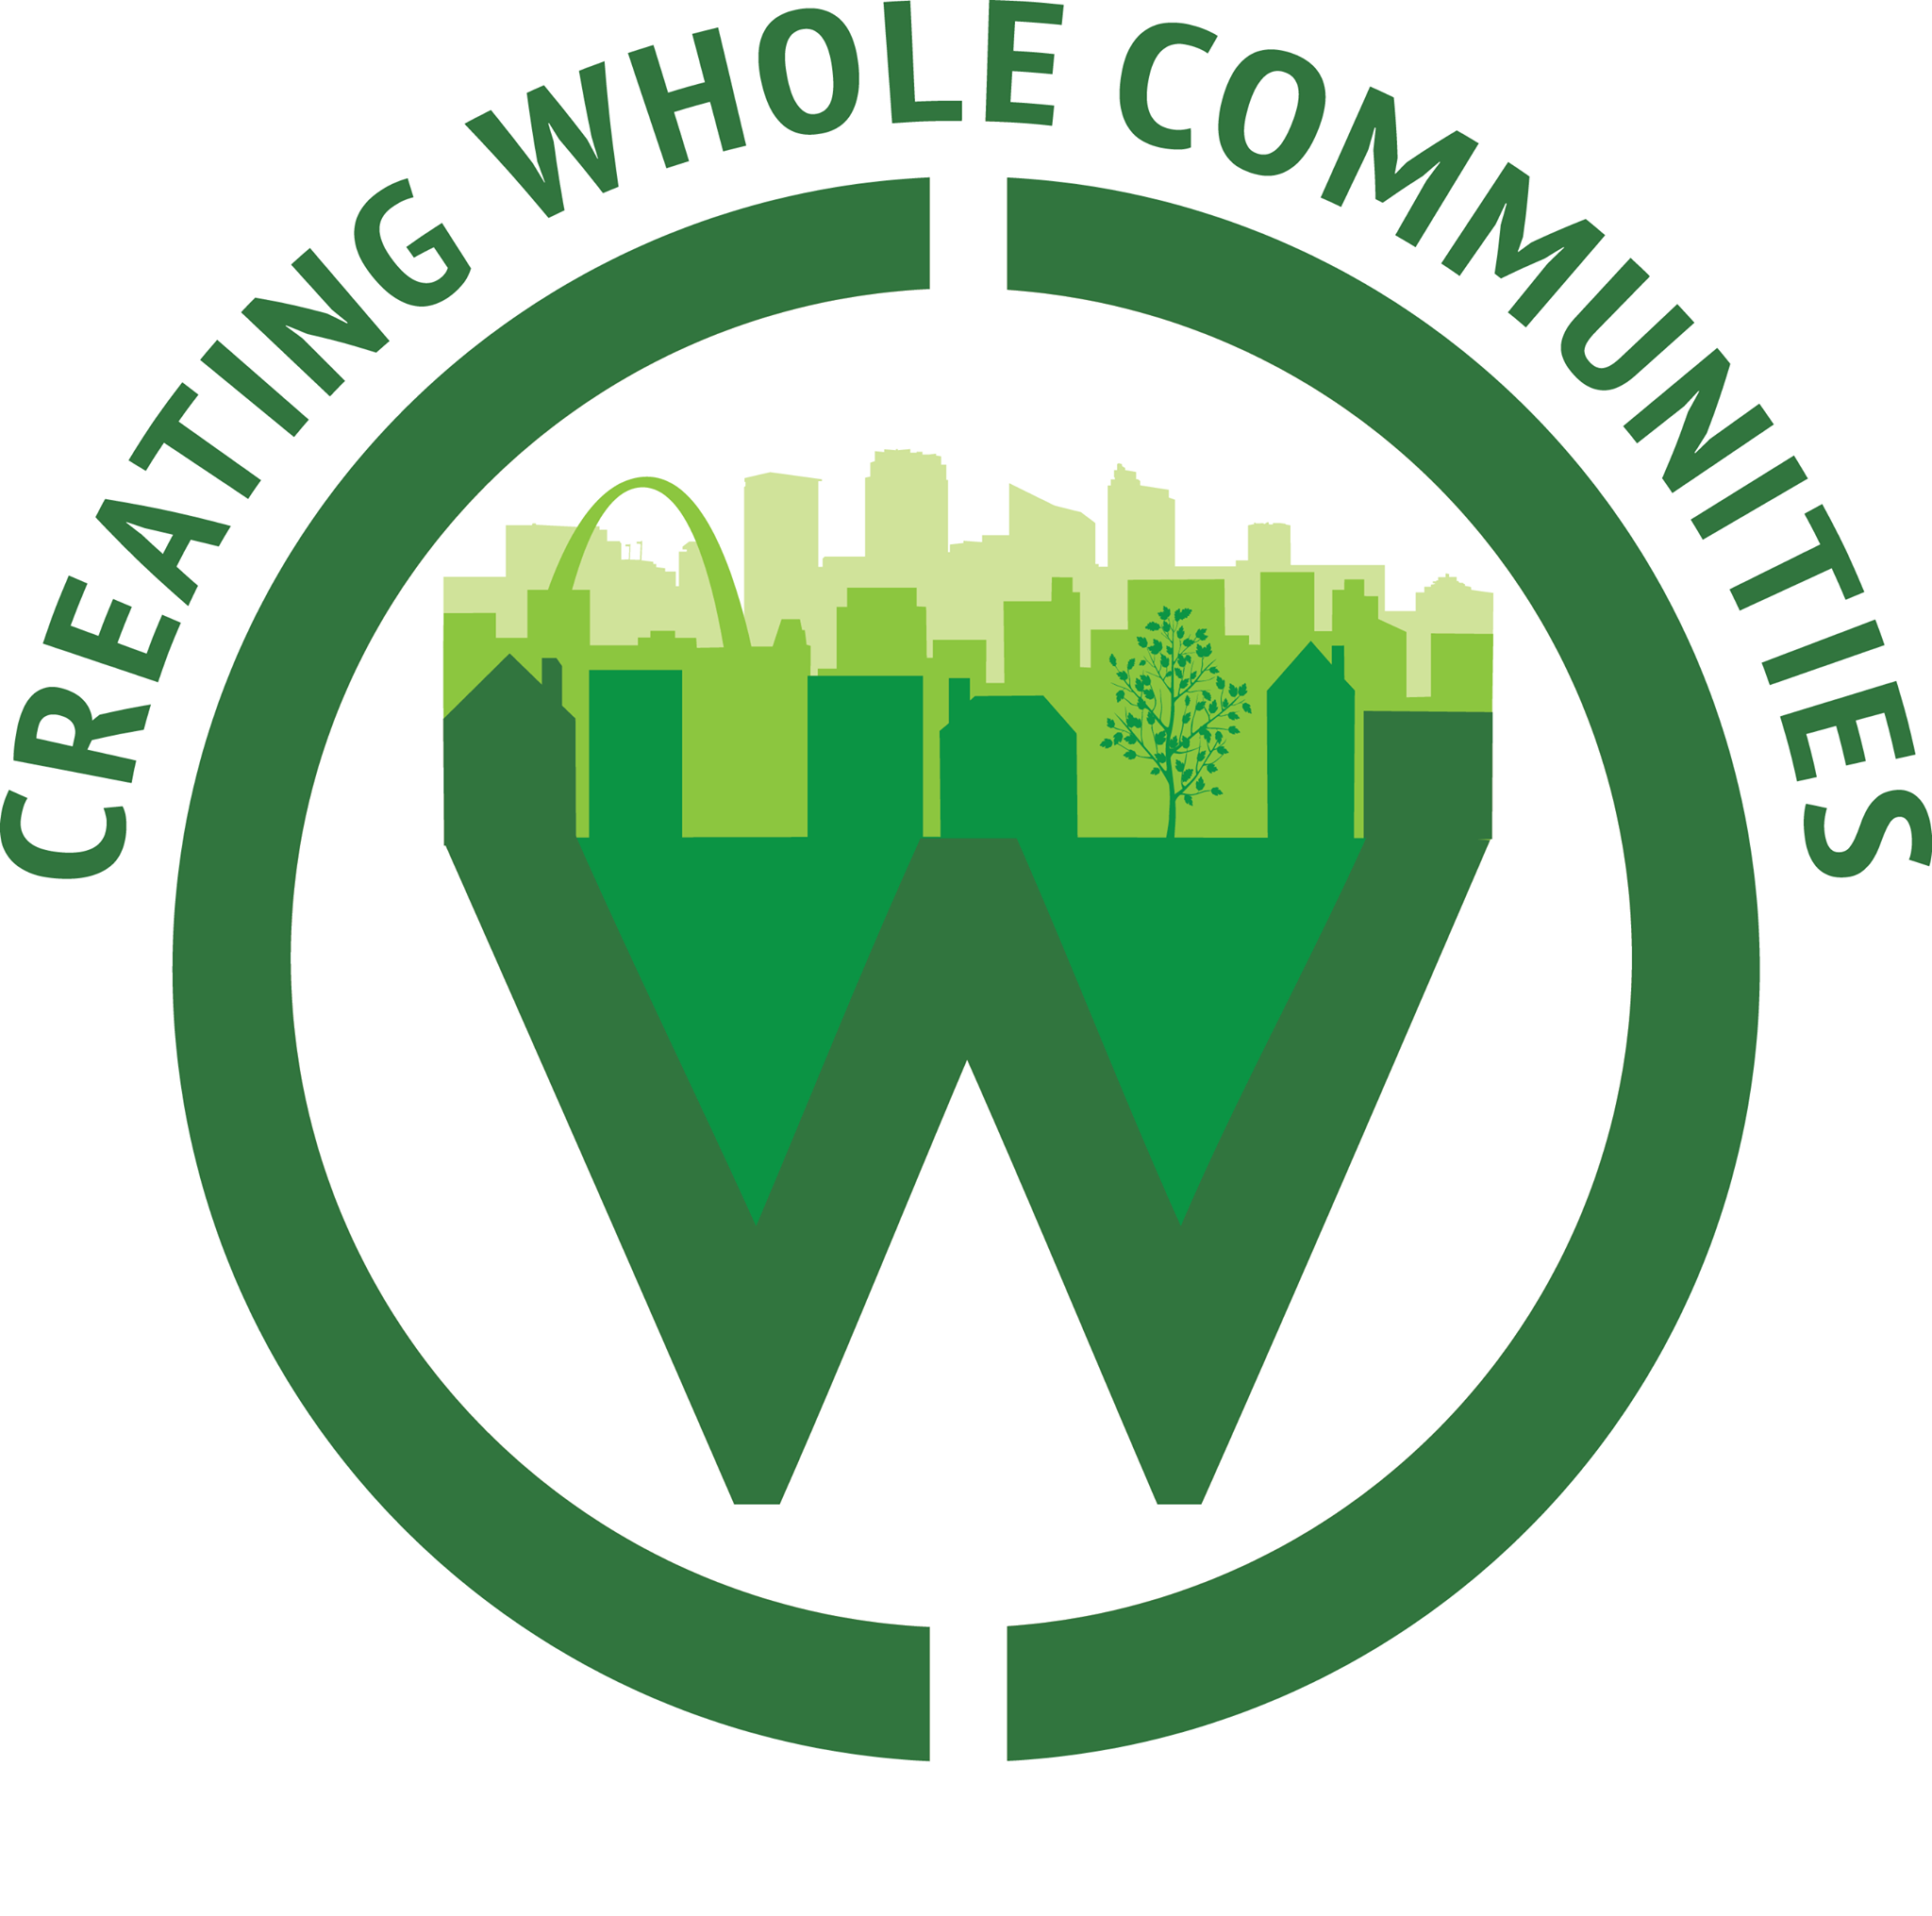 Creating Whole Communities